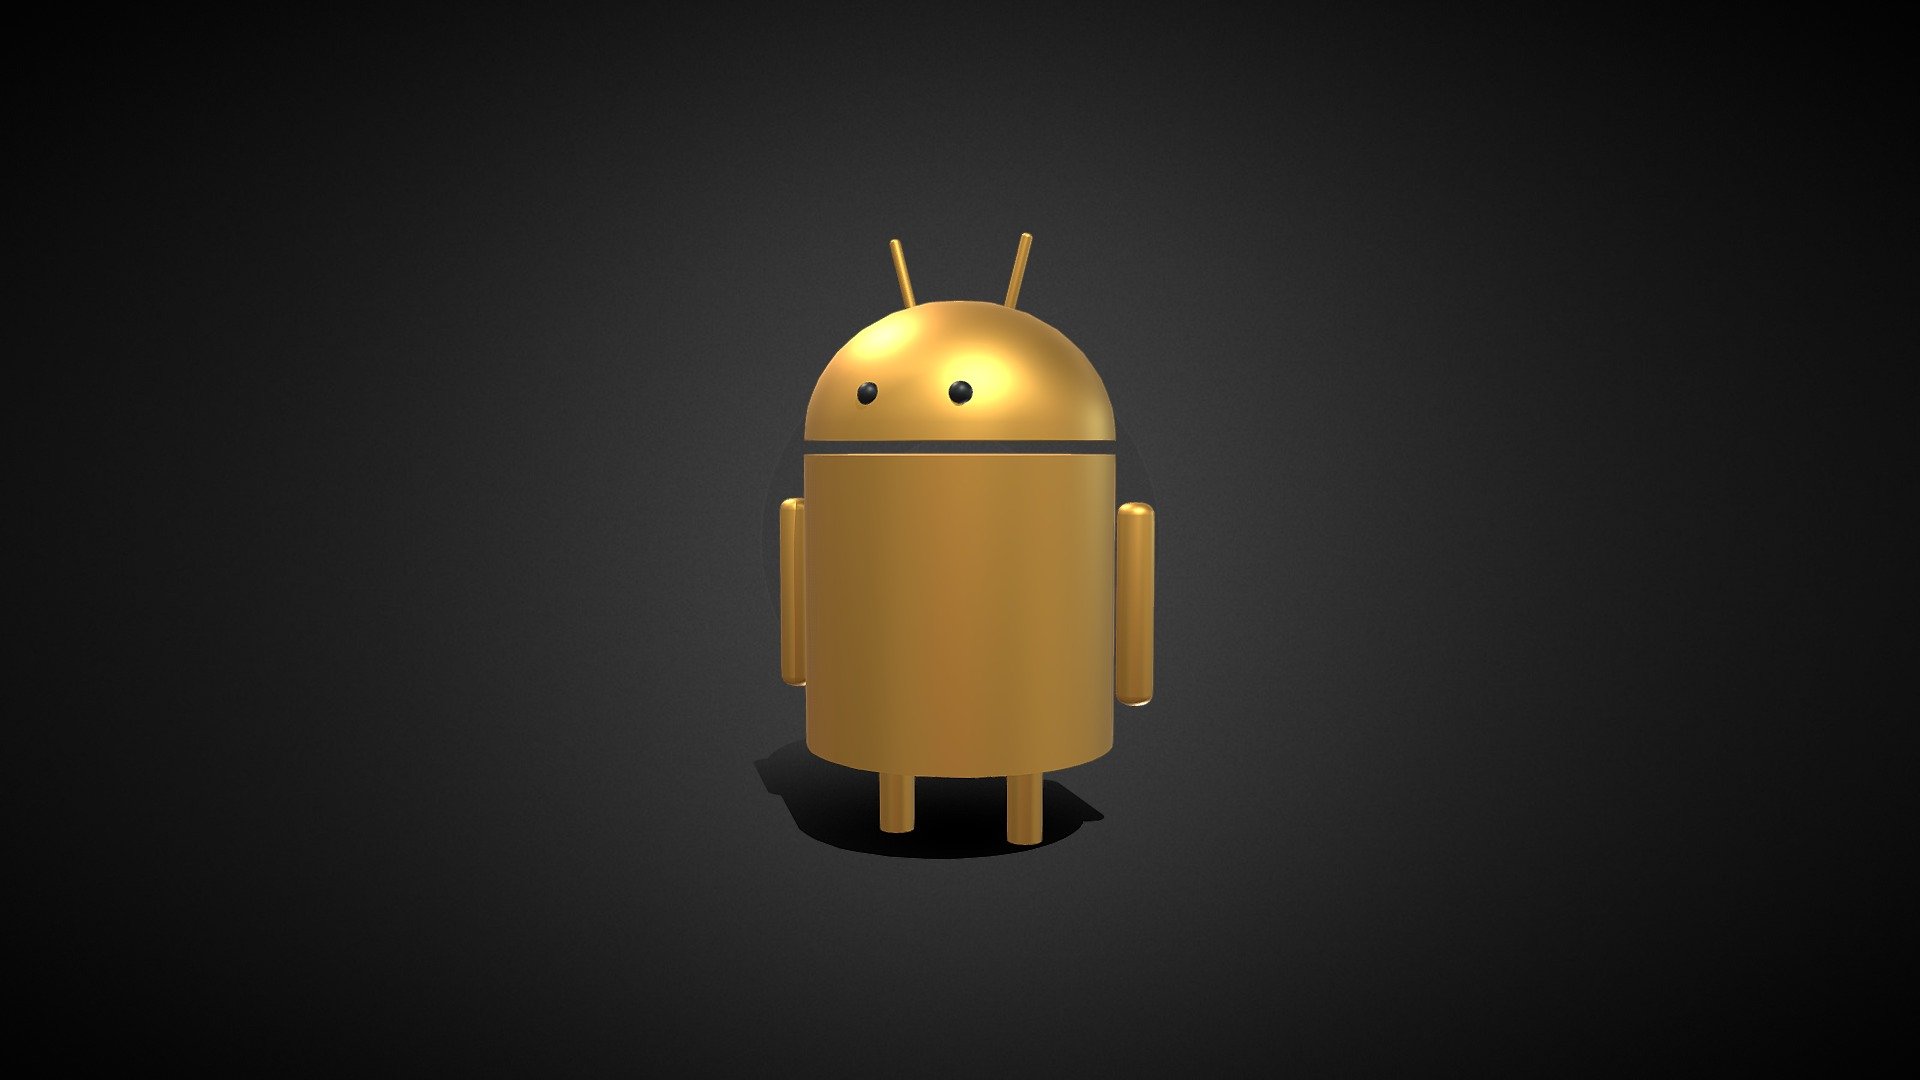 Android Logo Download Free 3d Model By Pateldev C64ab93 Sketchfab